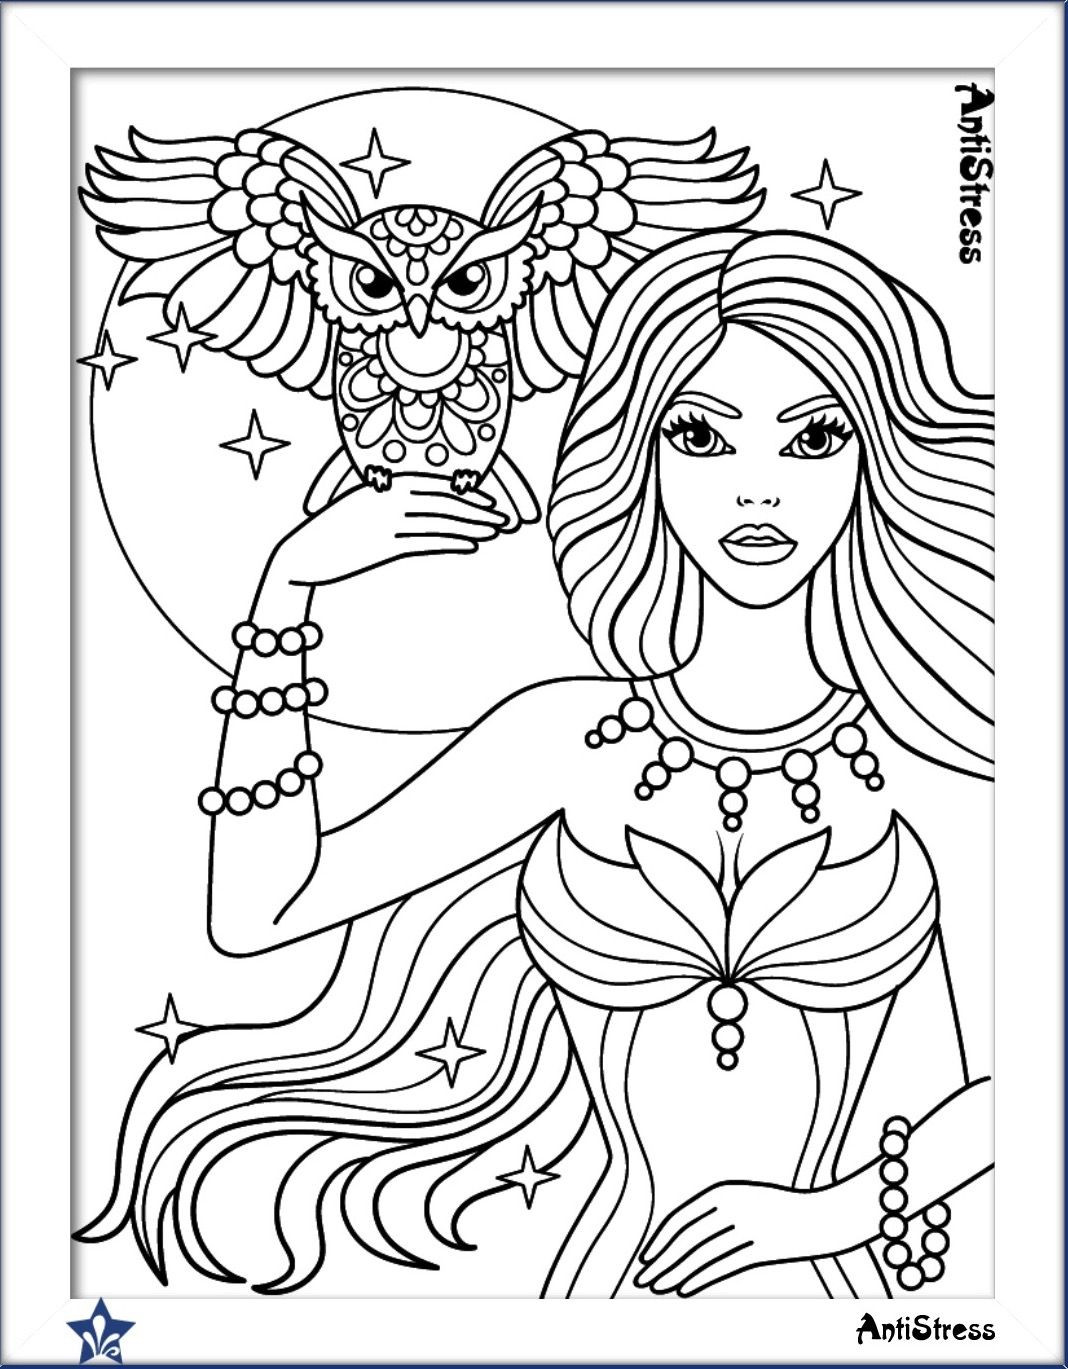 Coloring Sheets For Girls
 Owl and girl coloring page